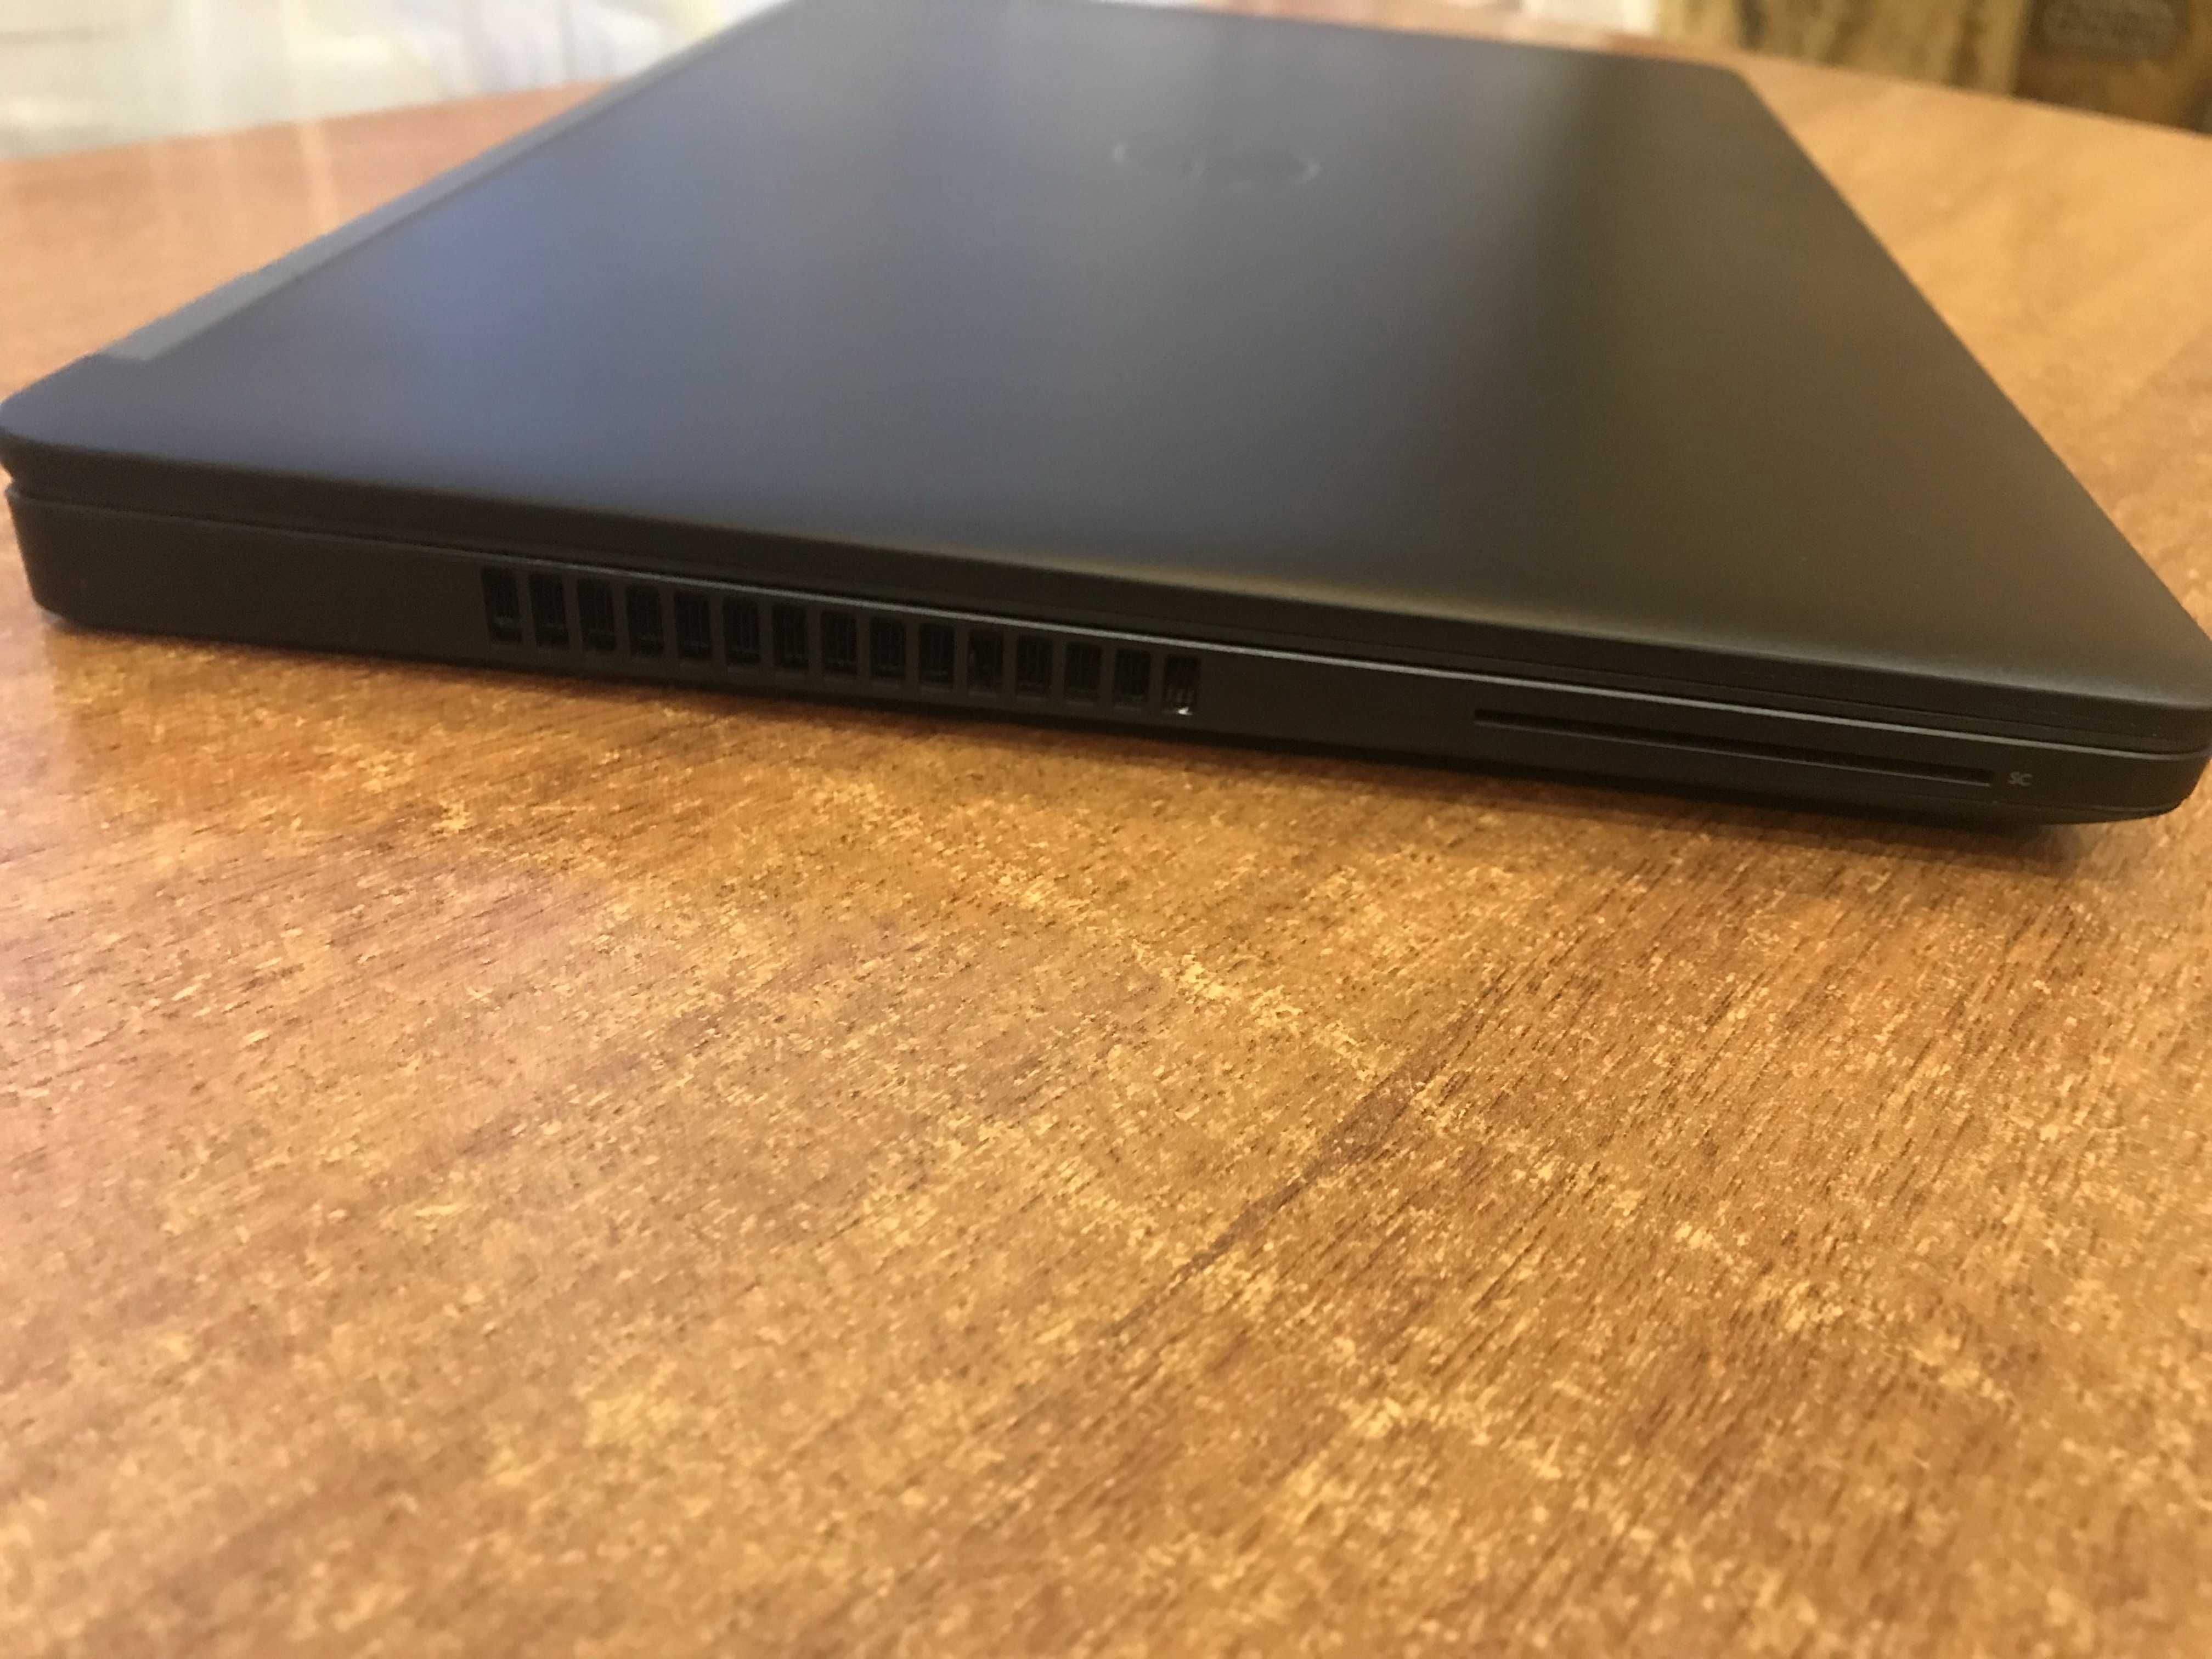 Ультрабук 15" FHD Touch Dell Latitude E5570 (i7-6820HQ/8/256/R7M370)